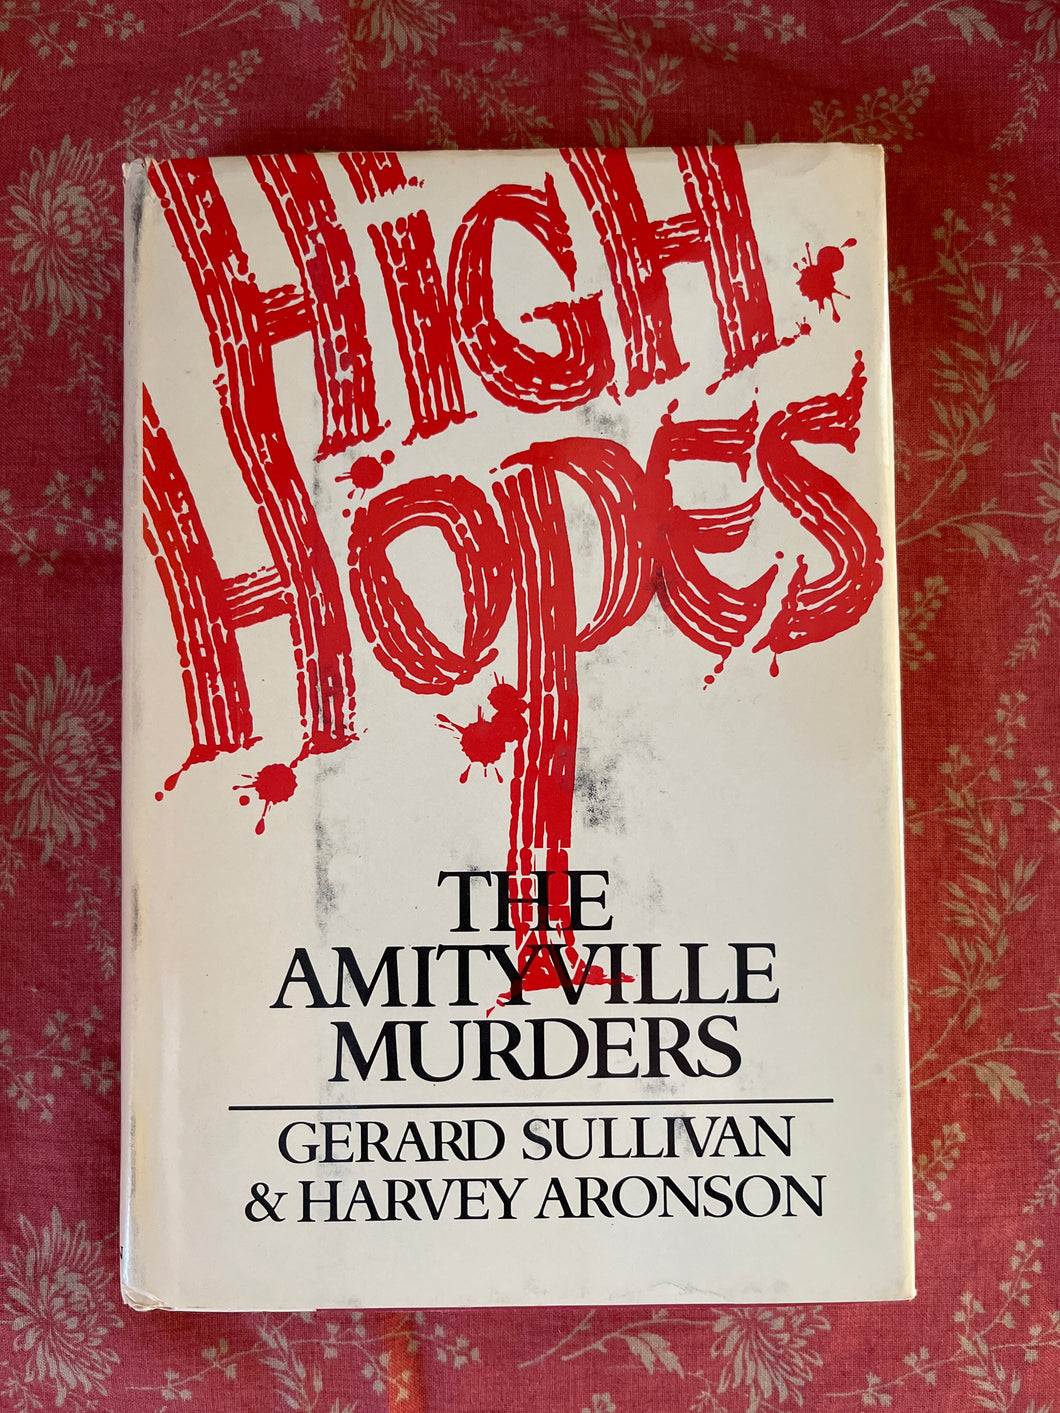 High Hopes: The Amityville Murders